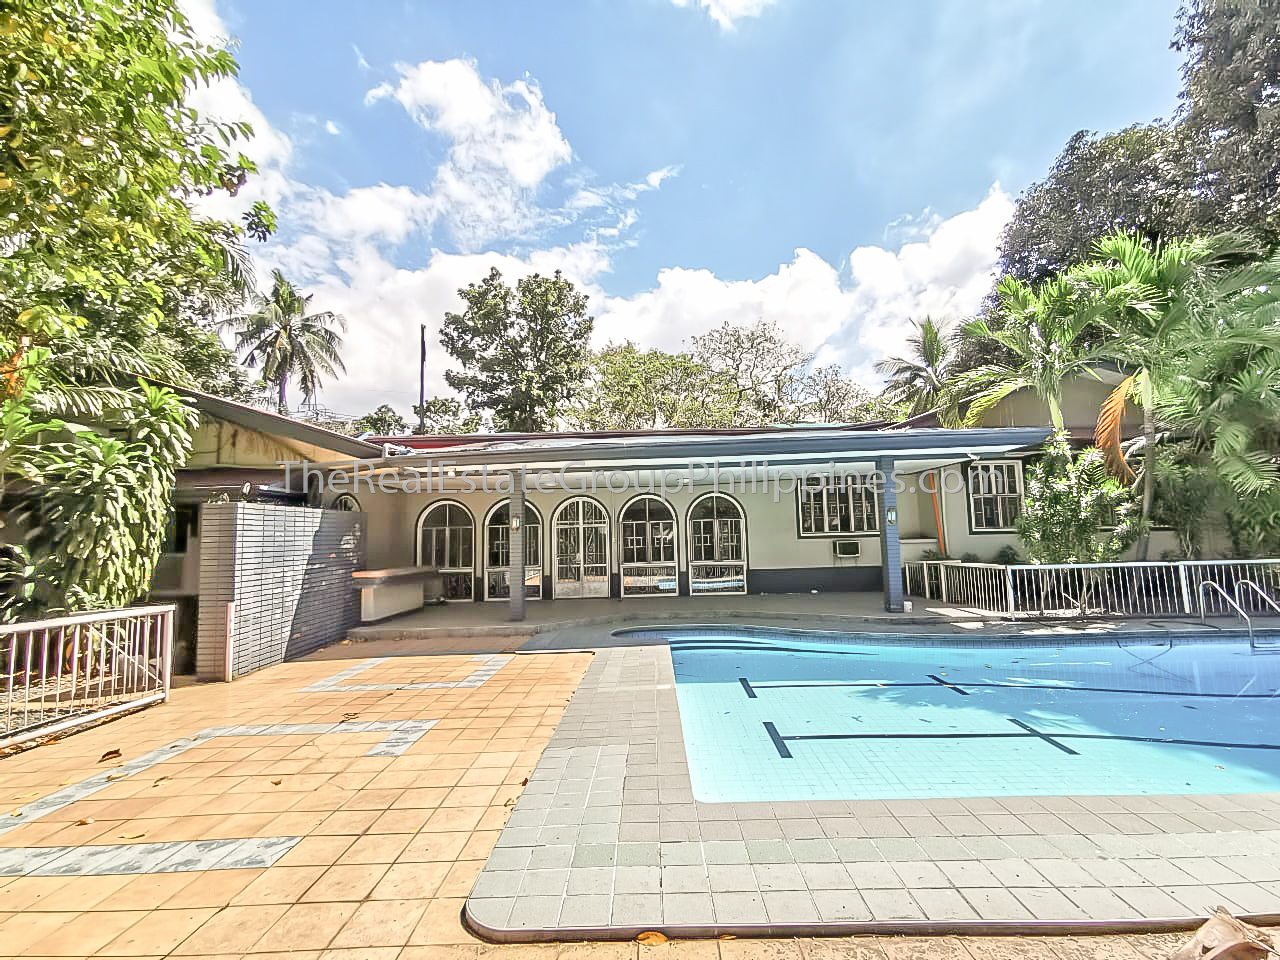 5BR House For Sale, Forbes Park Village, Makati-2